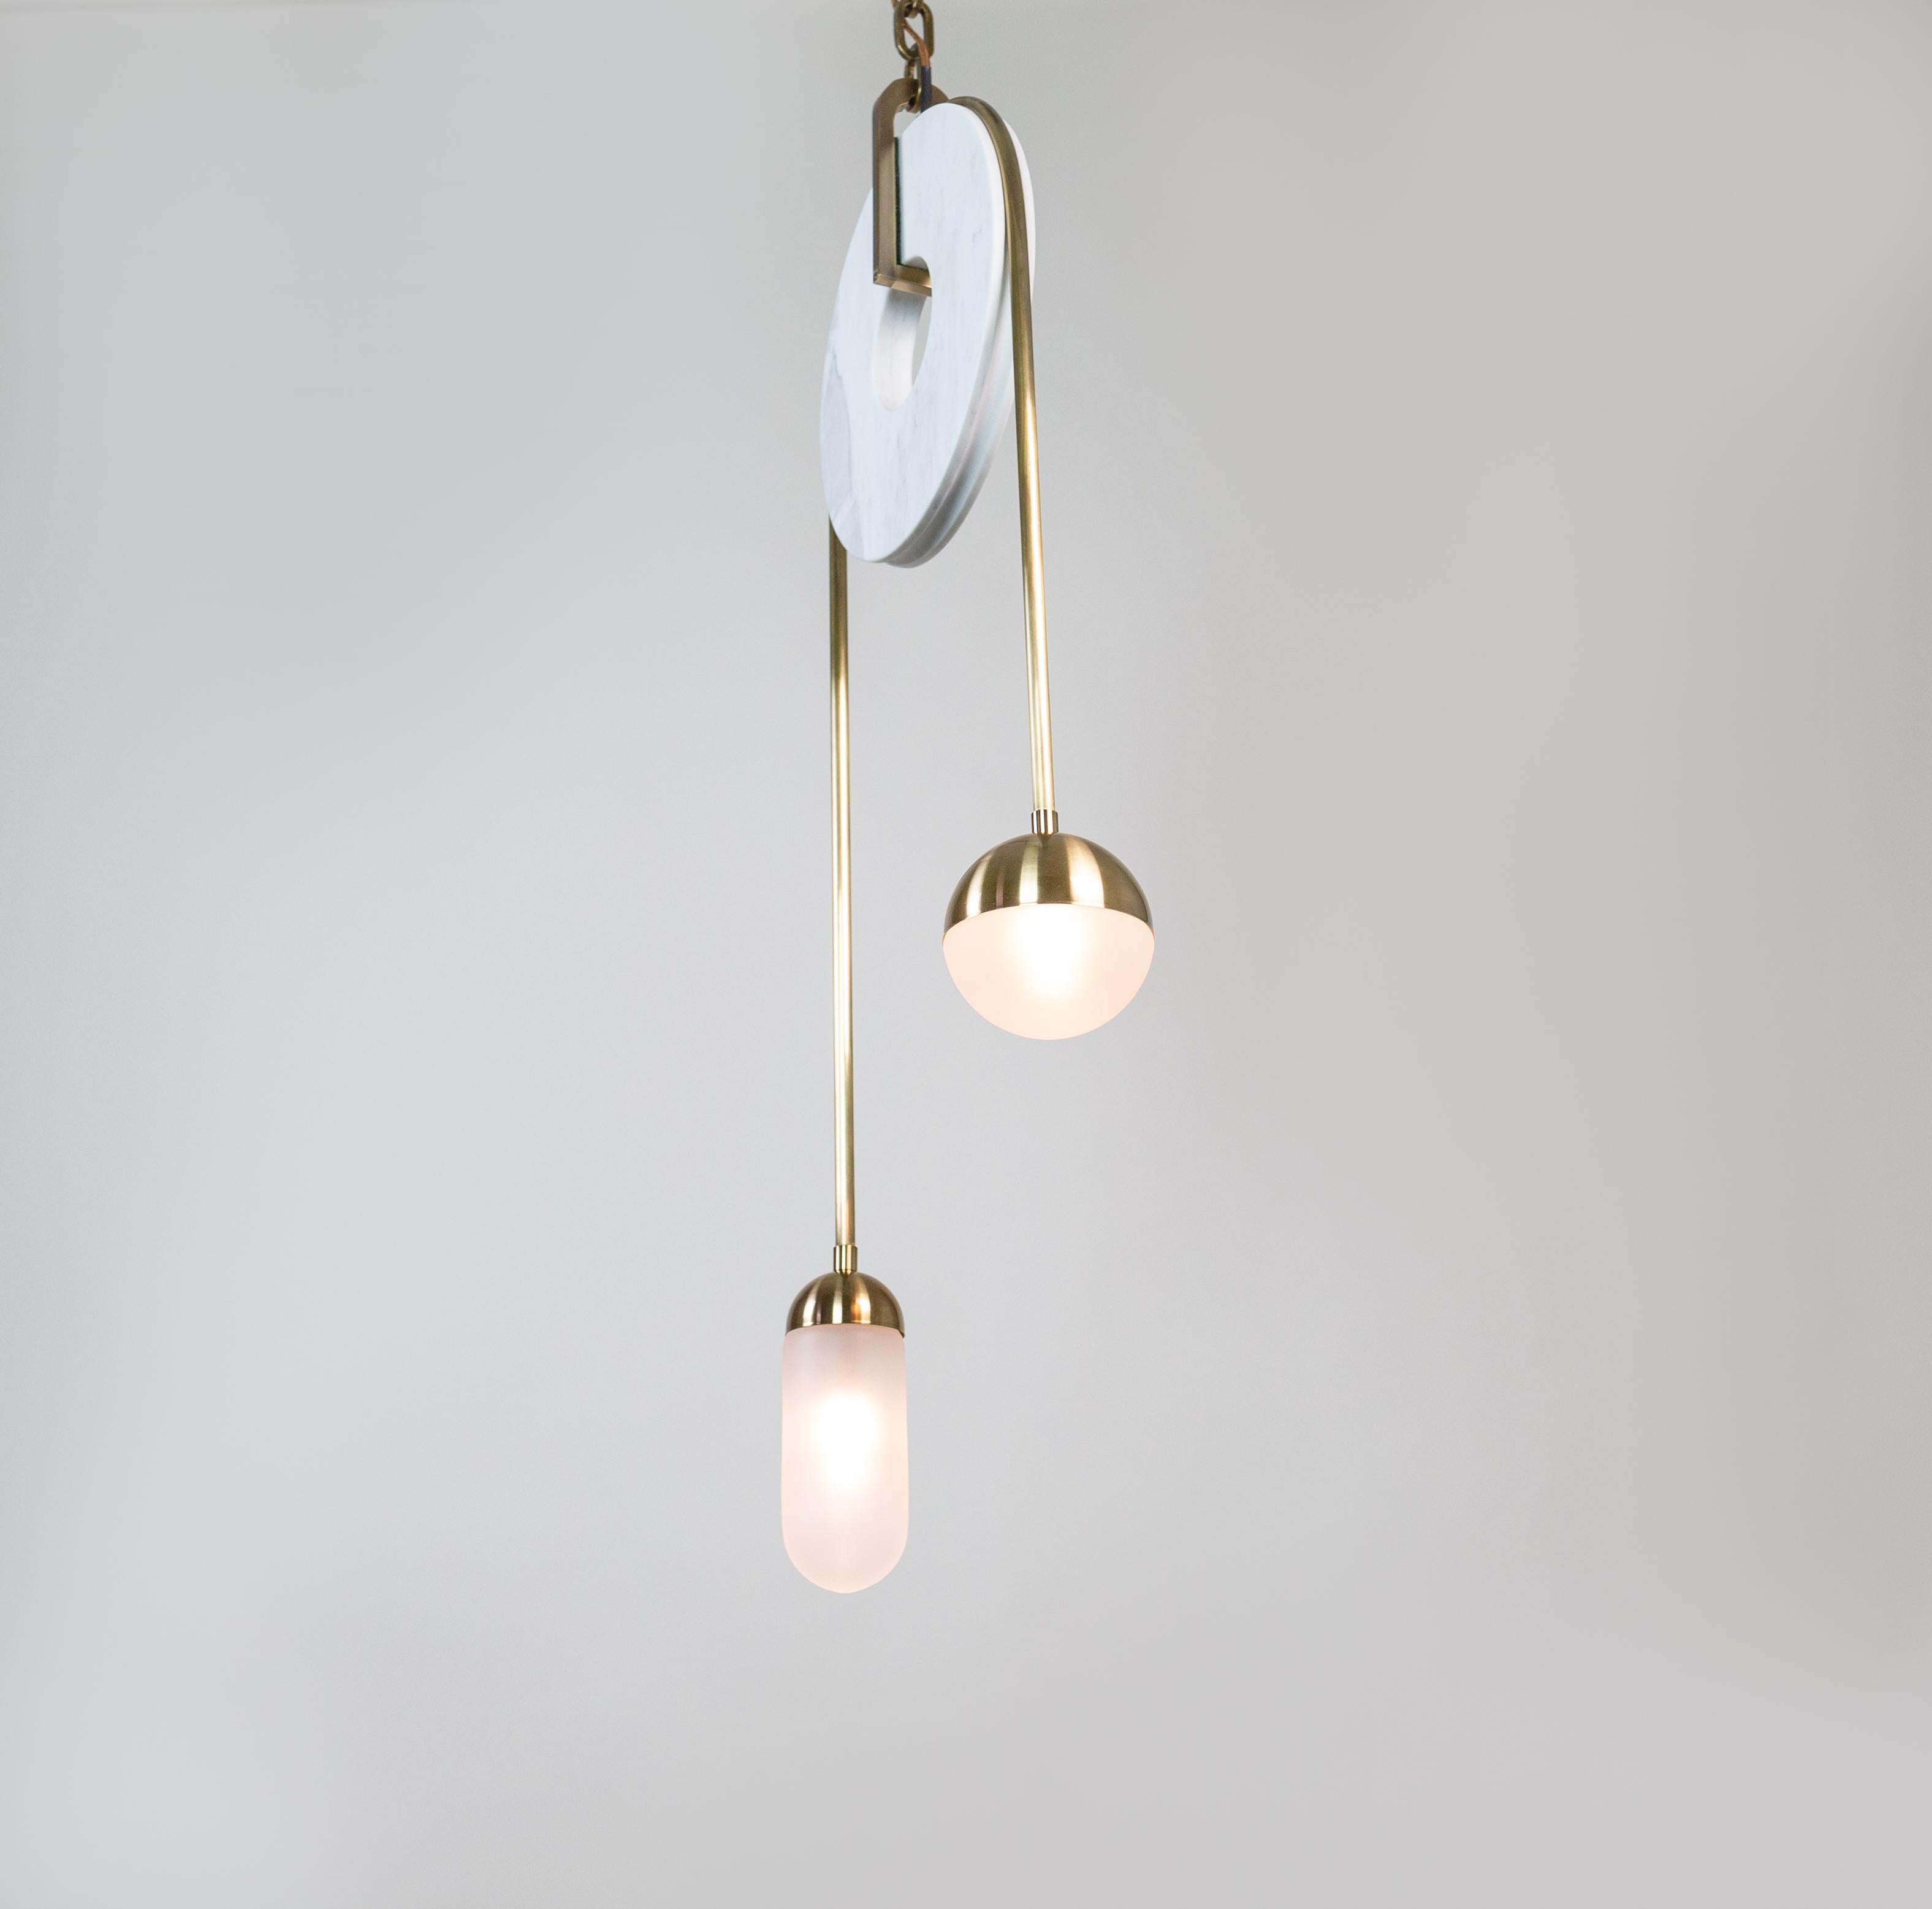 Kalin Asenov designs and fabricates lighting in Savannah, GA. Asenov works with a team of artisans and manufacturers to prototype, and build all pieces in his studio.
 
Asenov’s designs are driven by narrative; every object is an expression of a